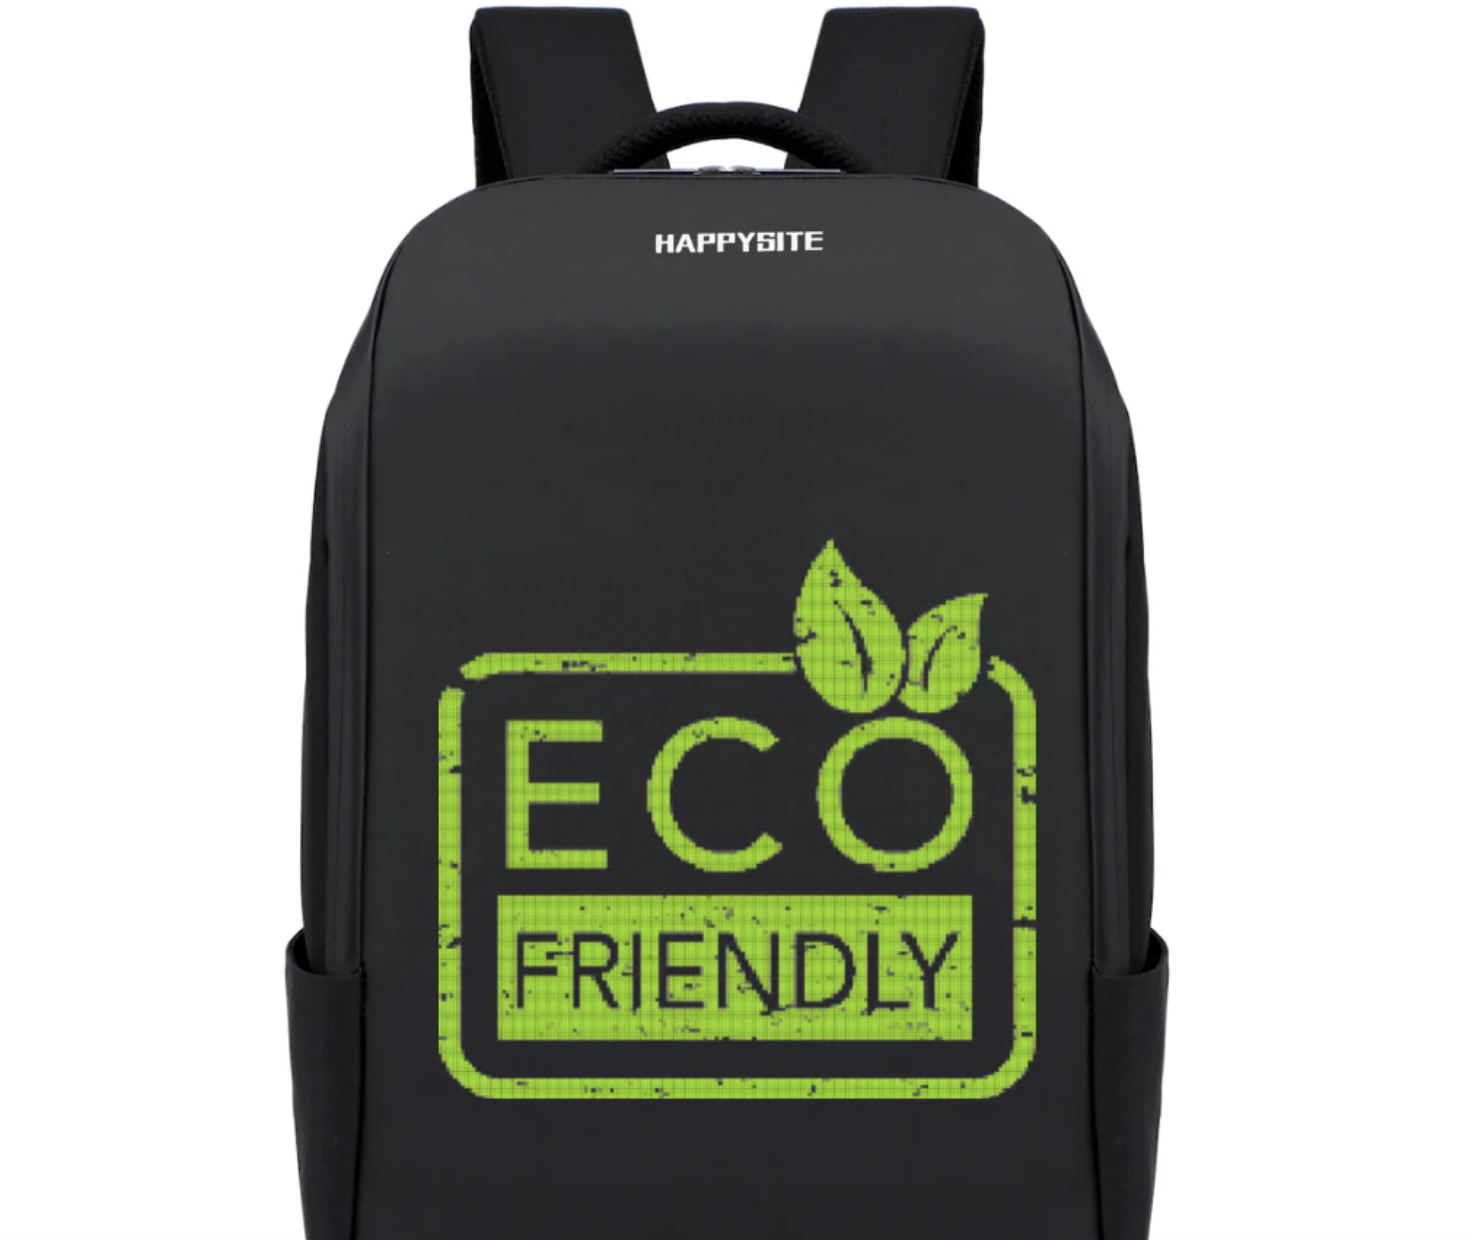 Make a Fashion Statement – Be the Envy with our LED Backpacks!